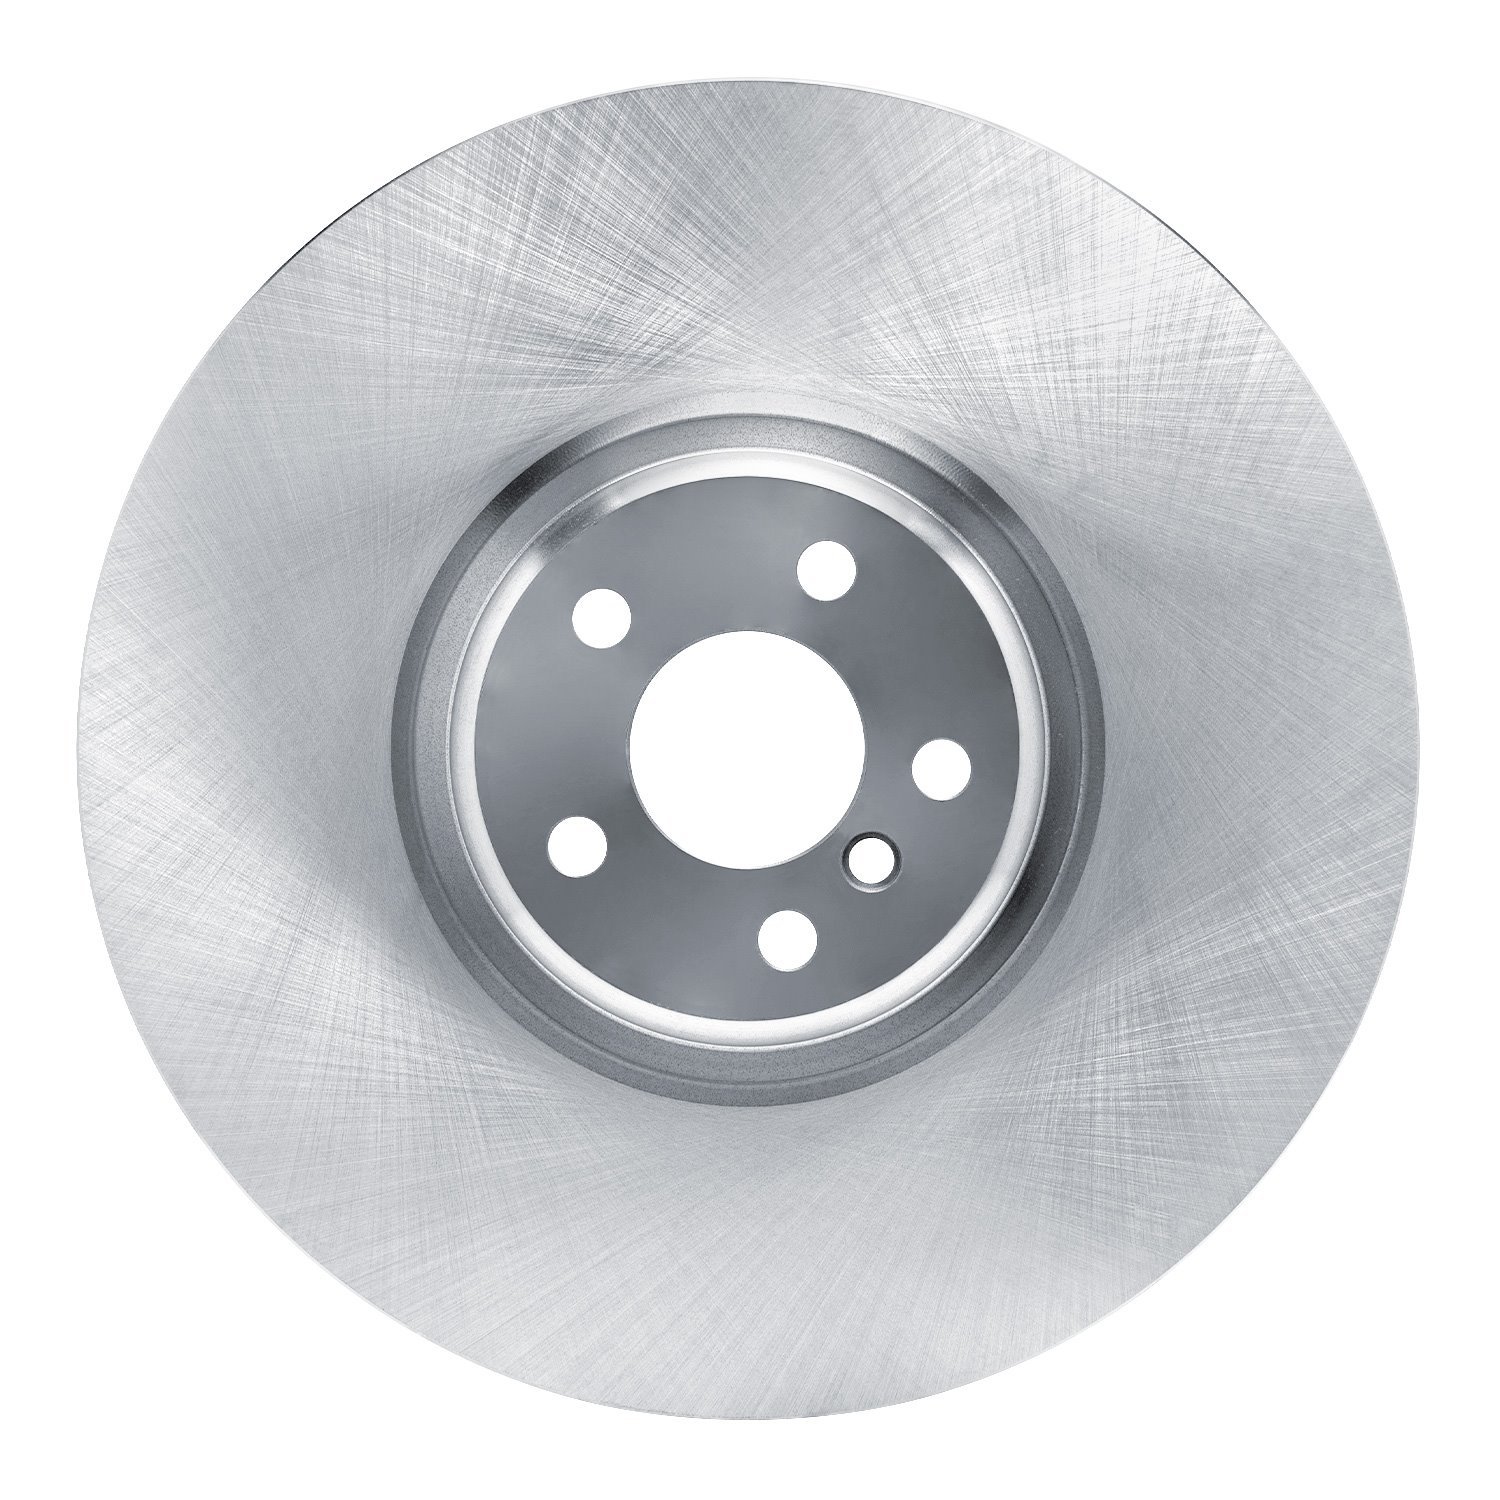 600-31165D Brake Rotor, Fits Select Multiple Makes/Models, Position: Right Front